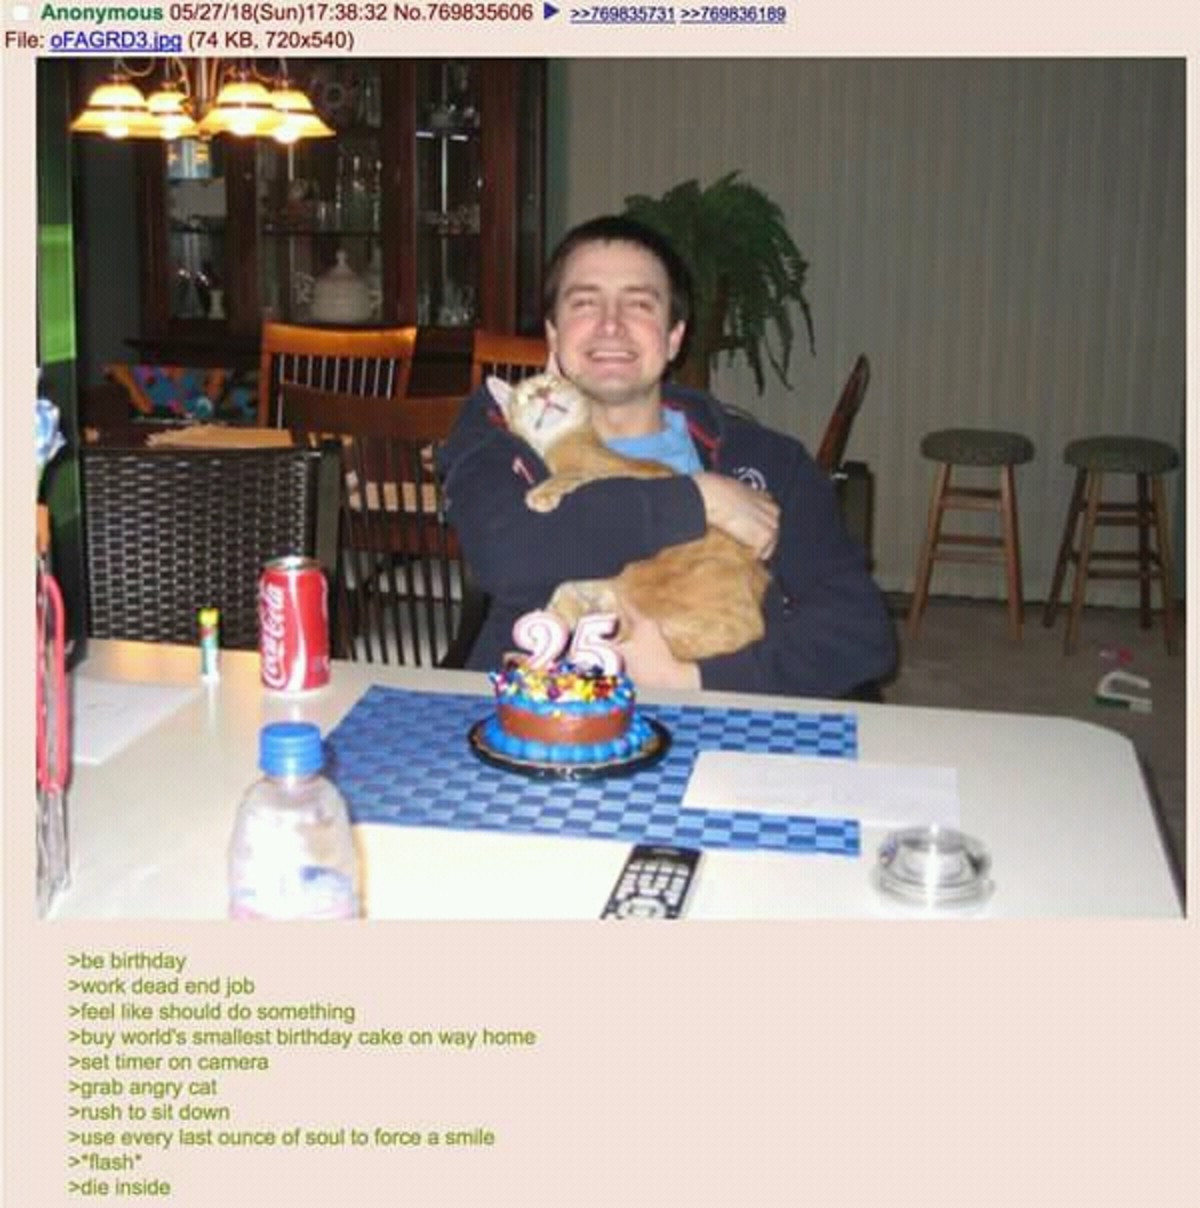 Anon is lonely. .. I'd befriend this man